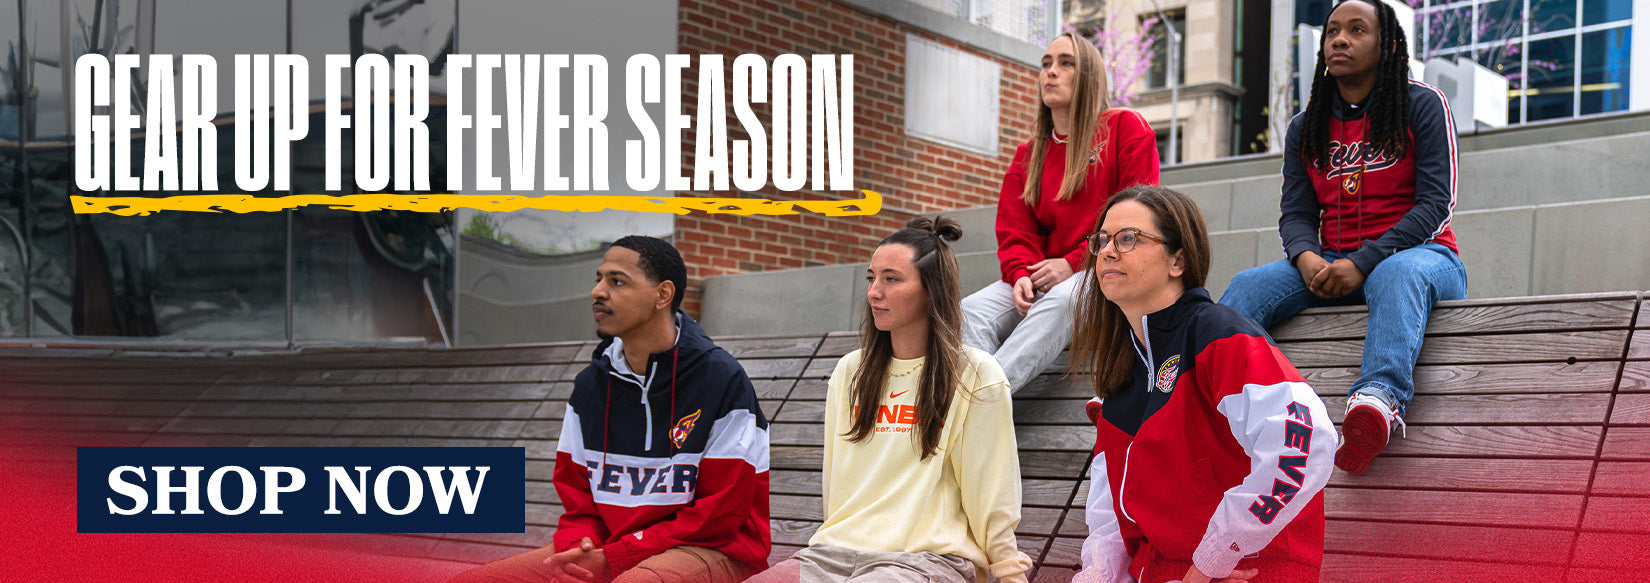 Gear Up For Fever Season SHOP NOW